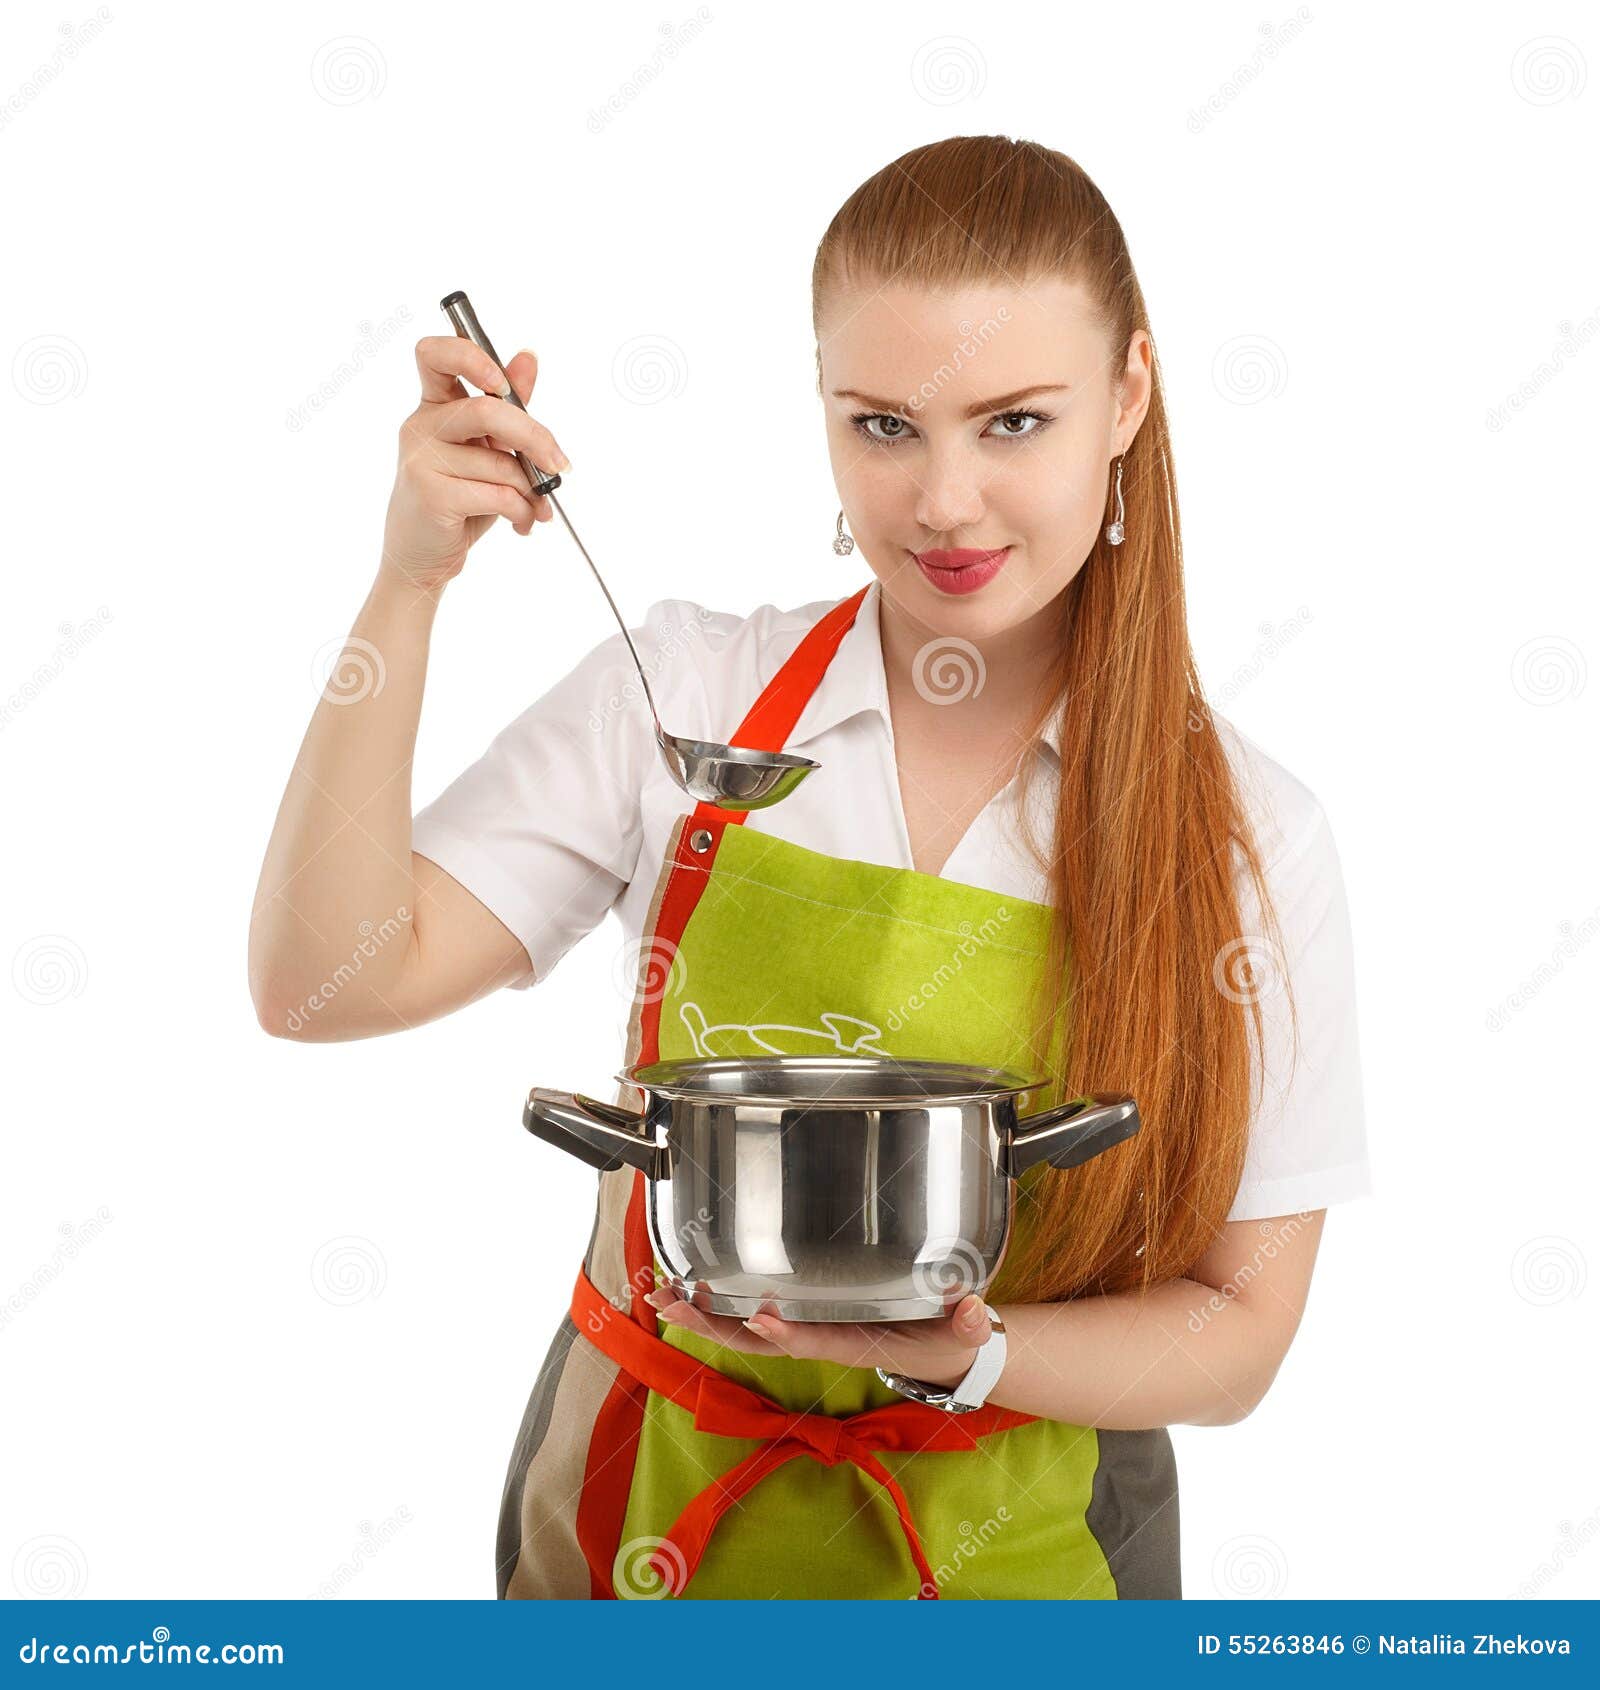 https://thumbs.dreamstime.com/z/beautiful-sexy-young-woman-cooking-meal-isolated-white-backgr-fresh-background-55263846.jpg